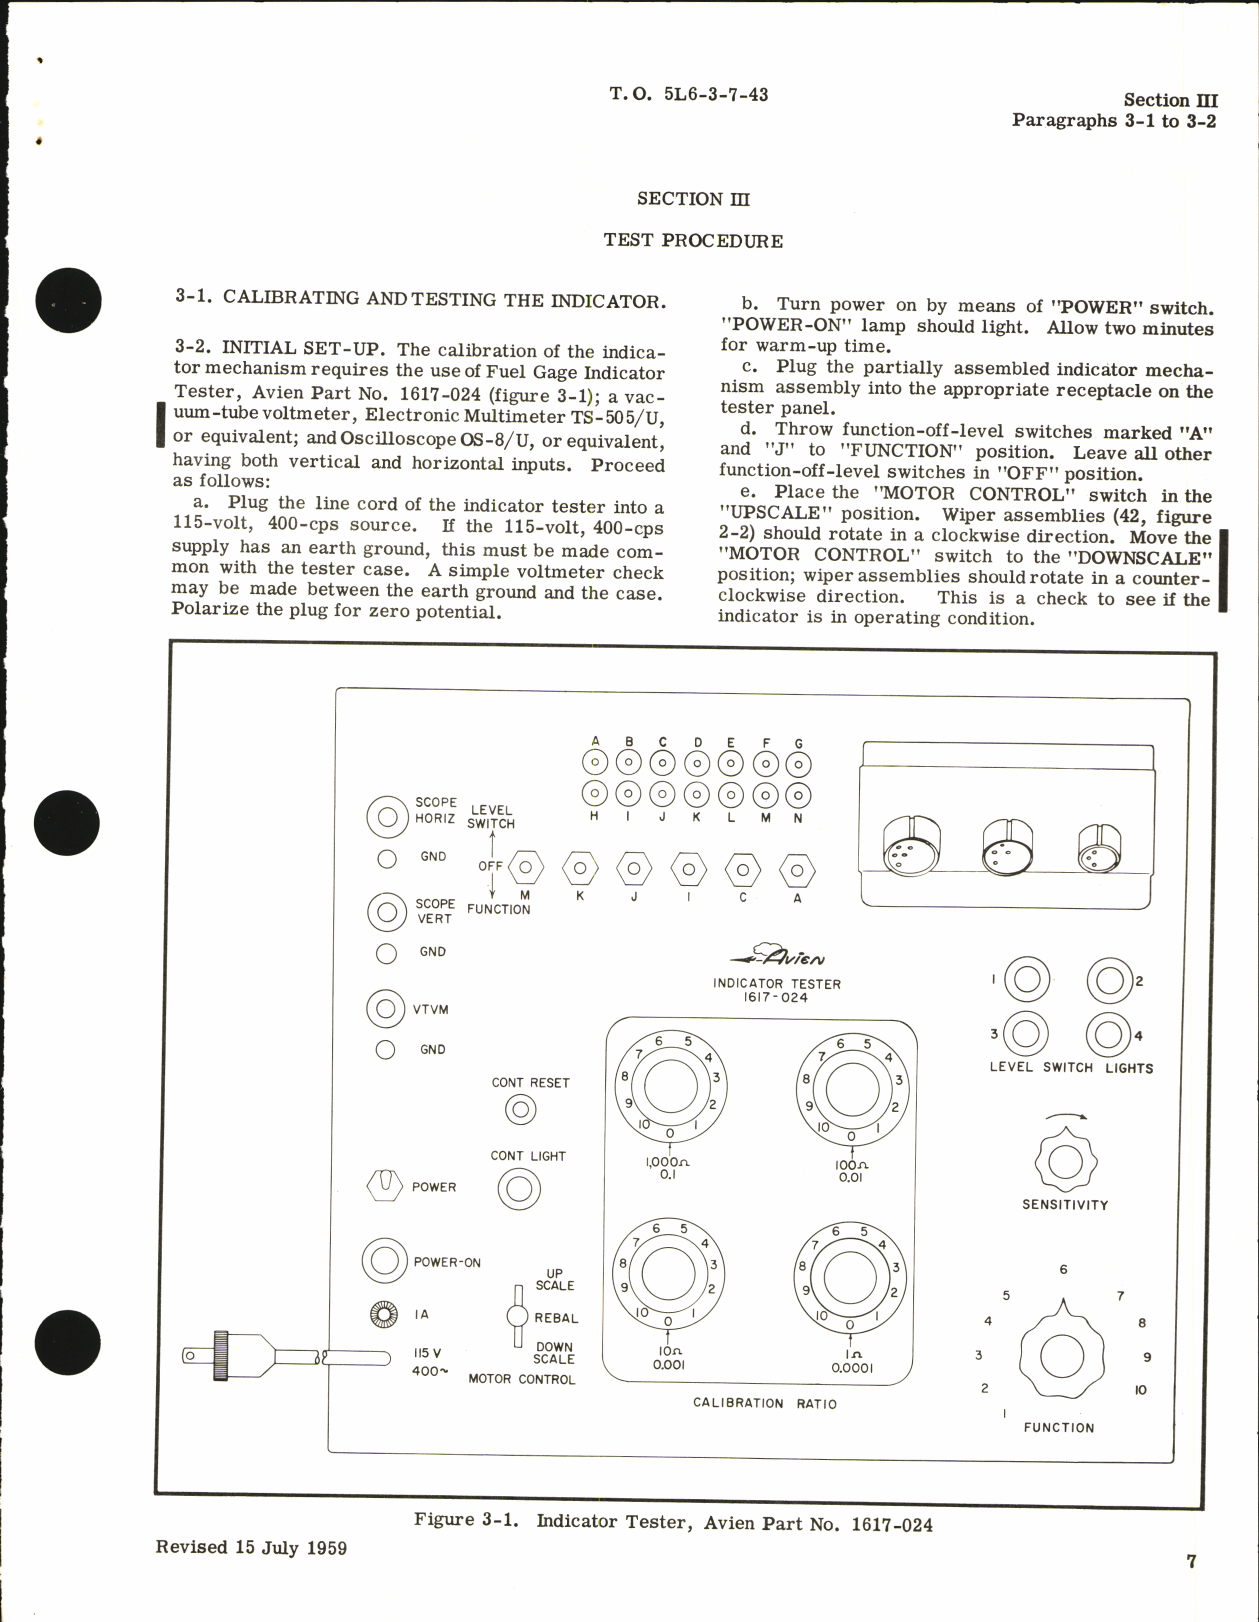 Sample page 7 from AirCorps Library document: Overhaul Instructions for Capacitor-Type Fuel Quantity Gage Indicators (Sensitive Type)